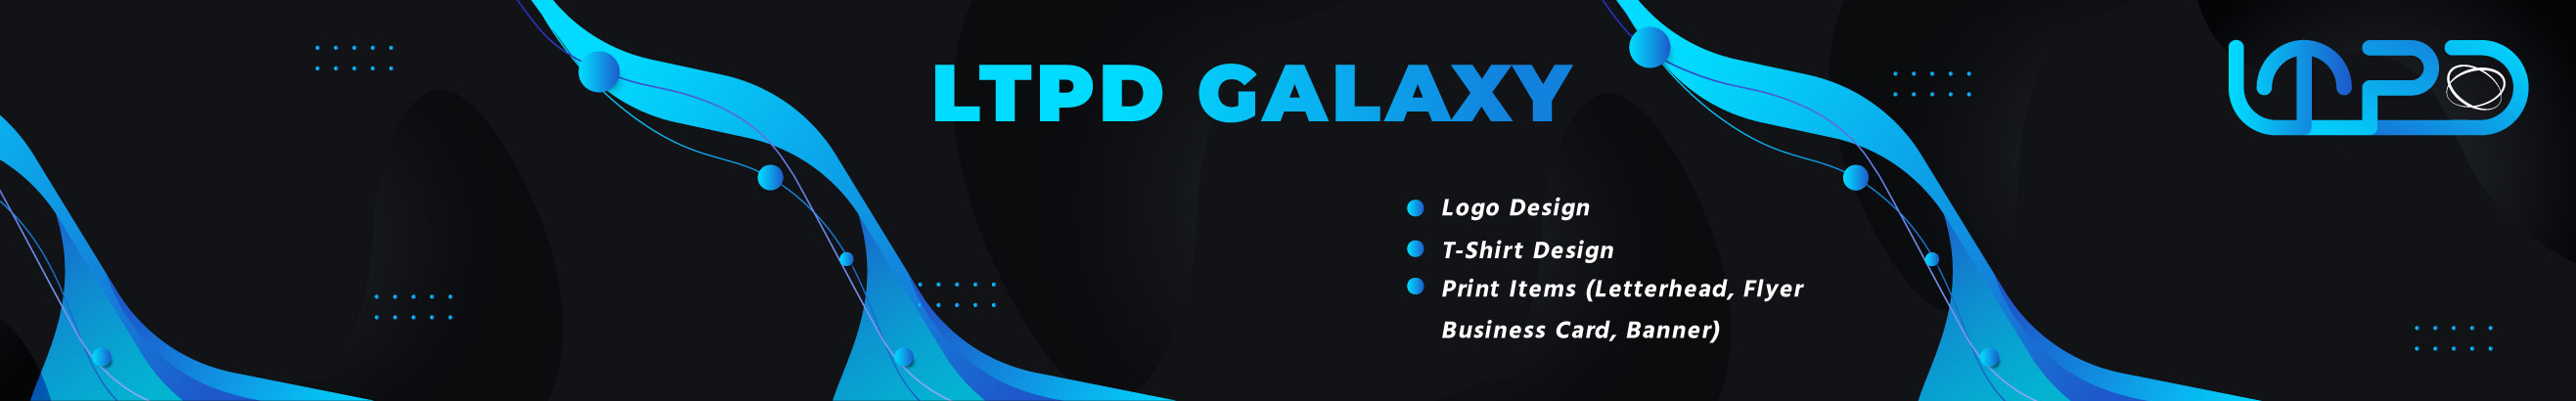 LTPD Galaxy's profile banner